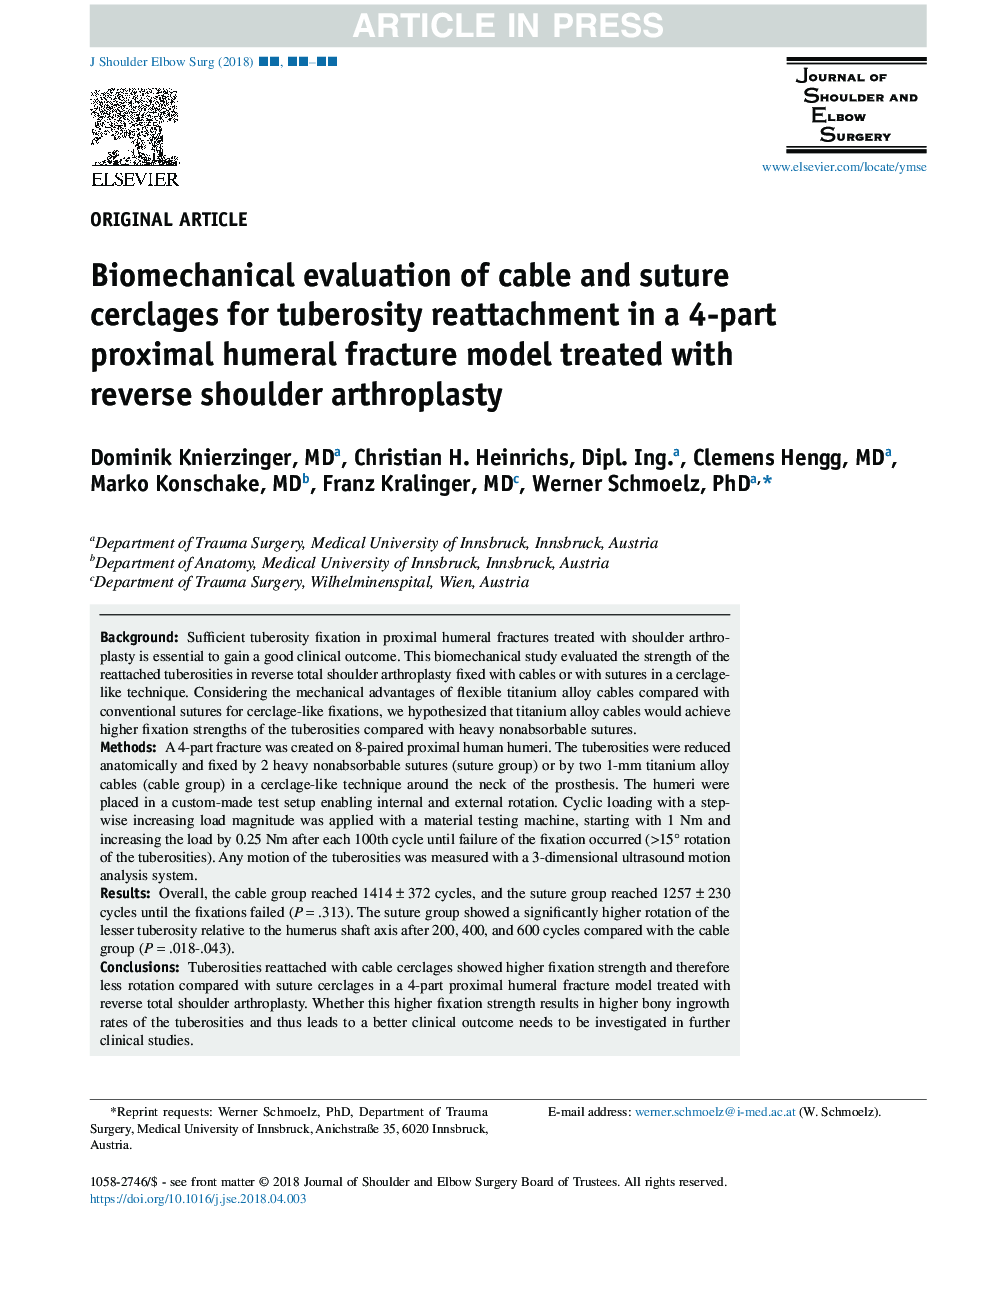 Biomechanical evaluation of cable and suture cerclages for tuberosity reattachment in a 4-part proximal humeral fracture model treated with reverse shoulder arthroplasty